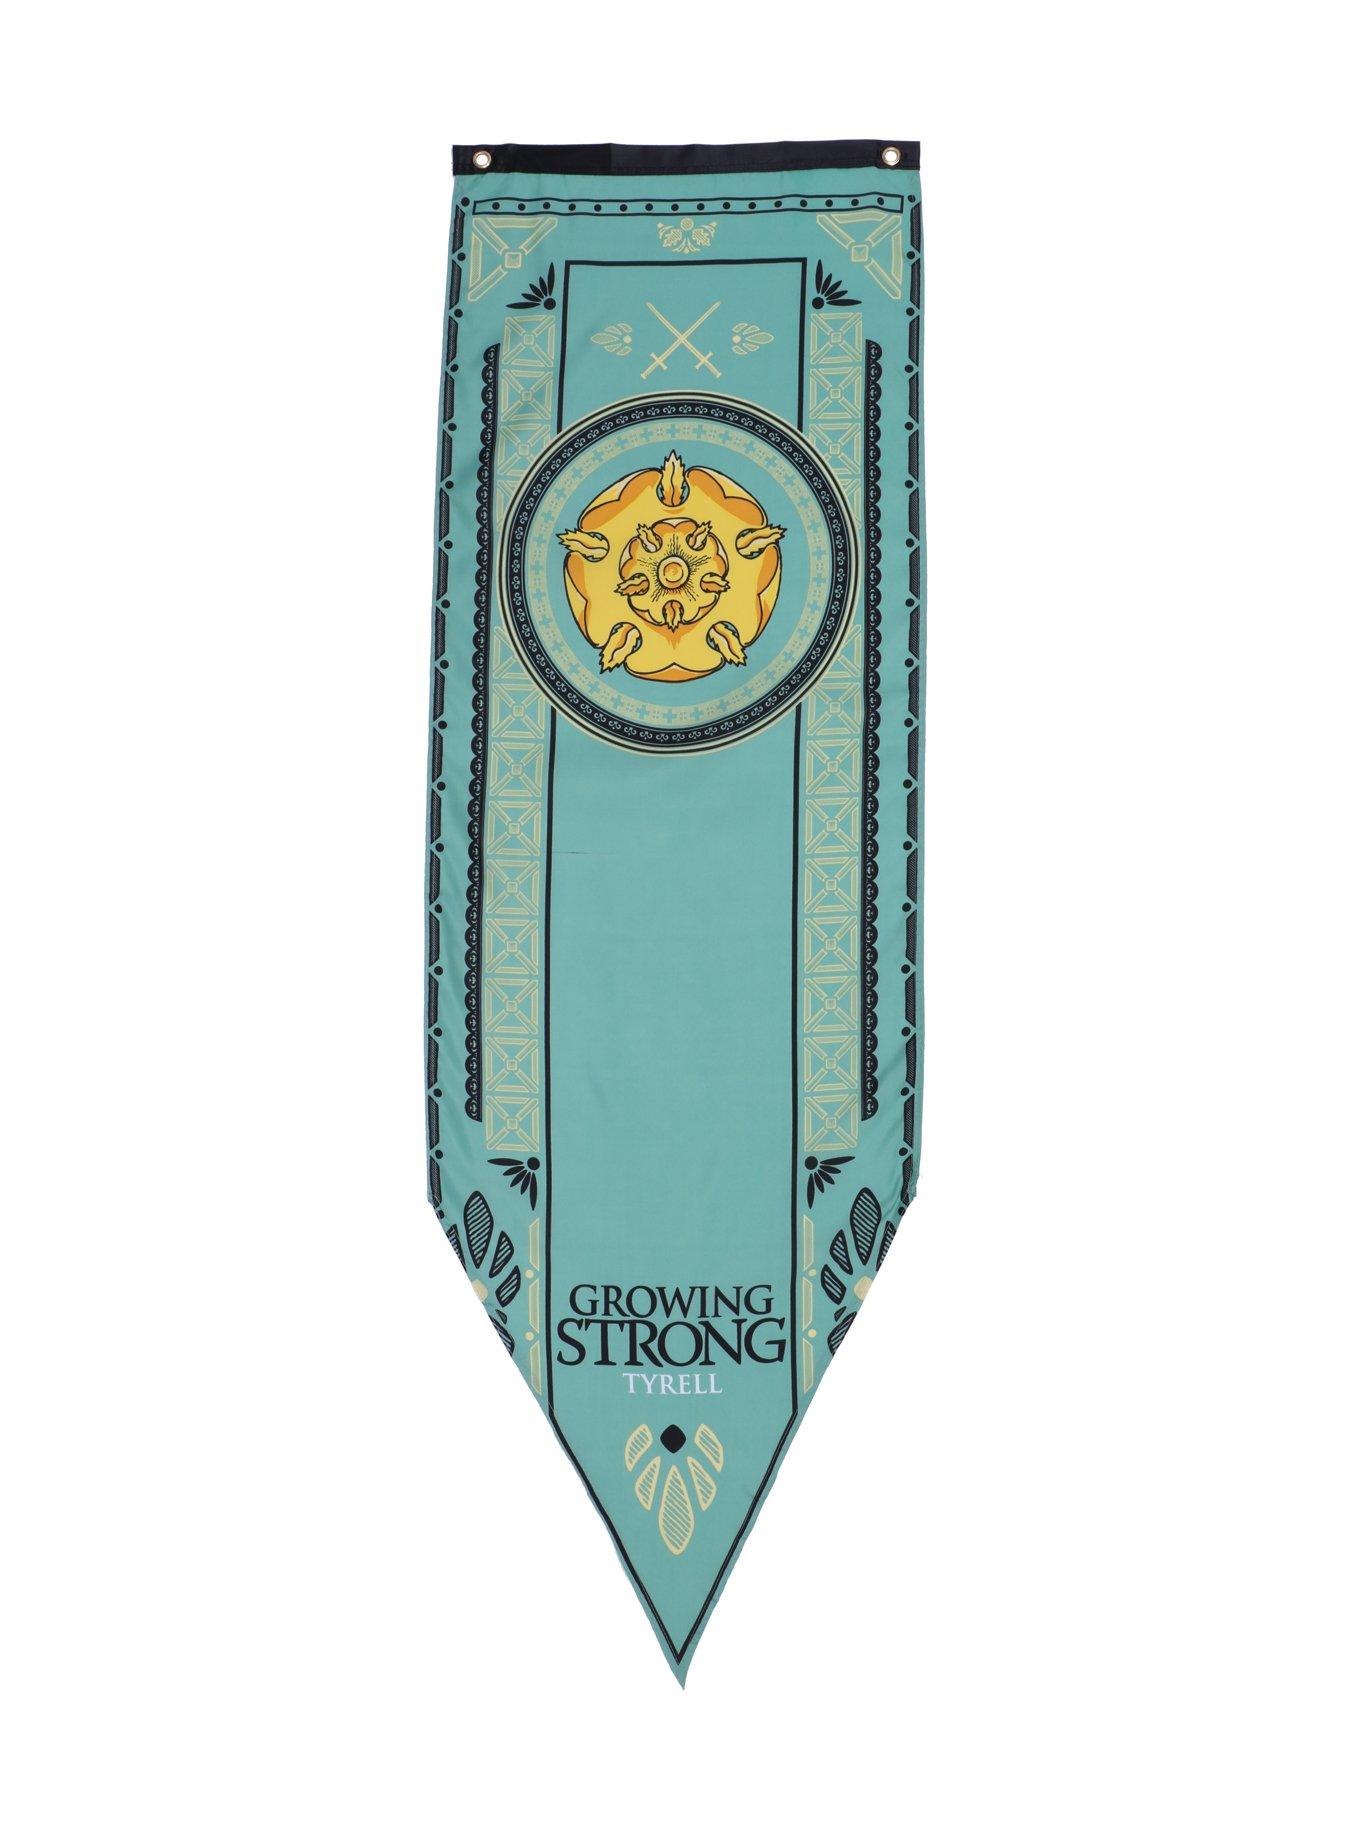 Game Of Thrones Tyrell Tournament Banner | Hot Topic